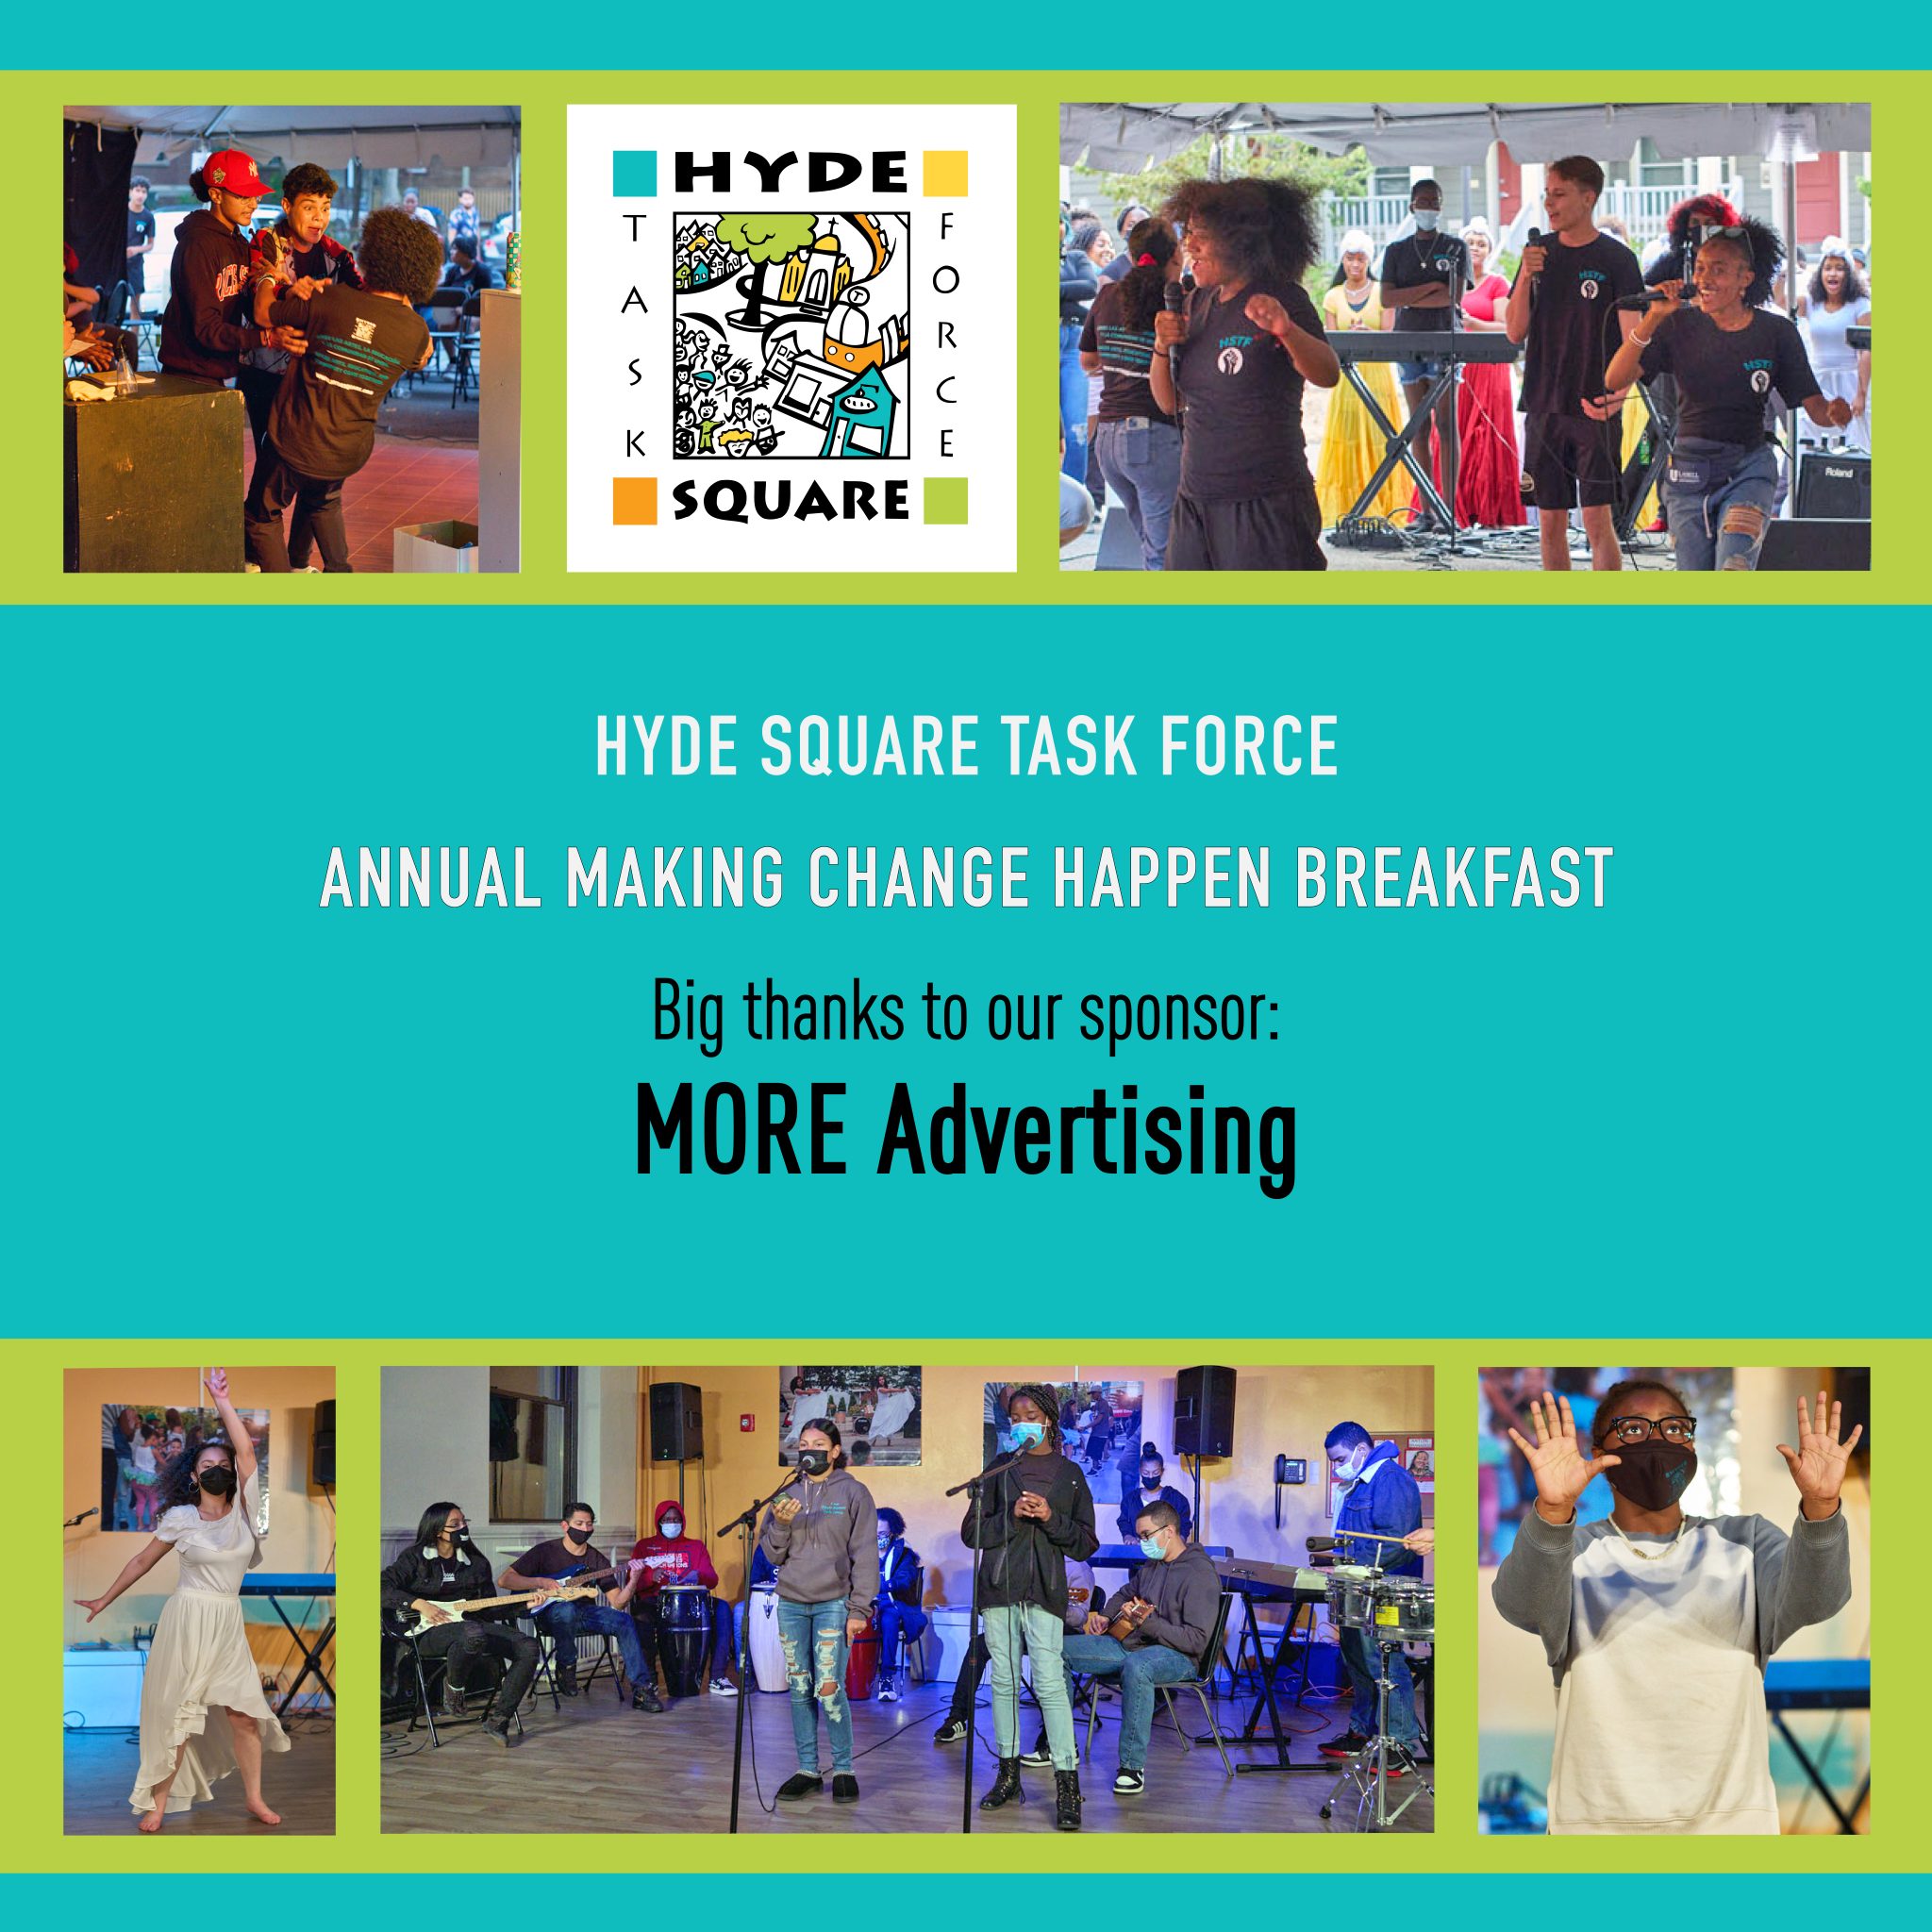 MORE Advertising is a sponsor of our Annual Breakfast and we couldn't be more grateful! In addition to their sponsorship, they have supported our work with their incredible design and marketing expertise over the years. Thank you MORE Advertising!